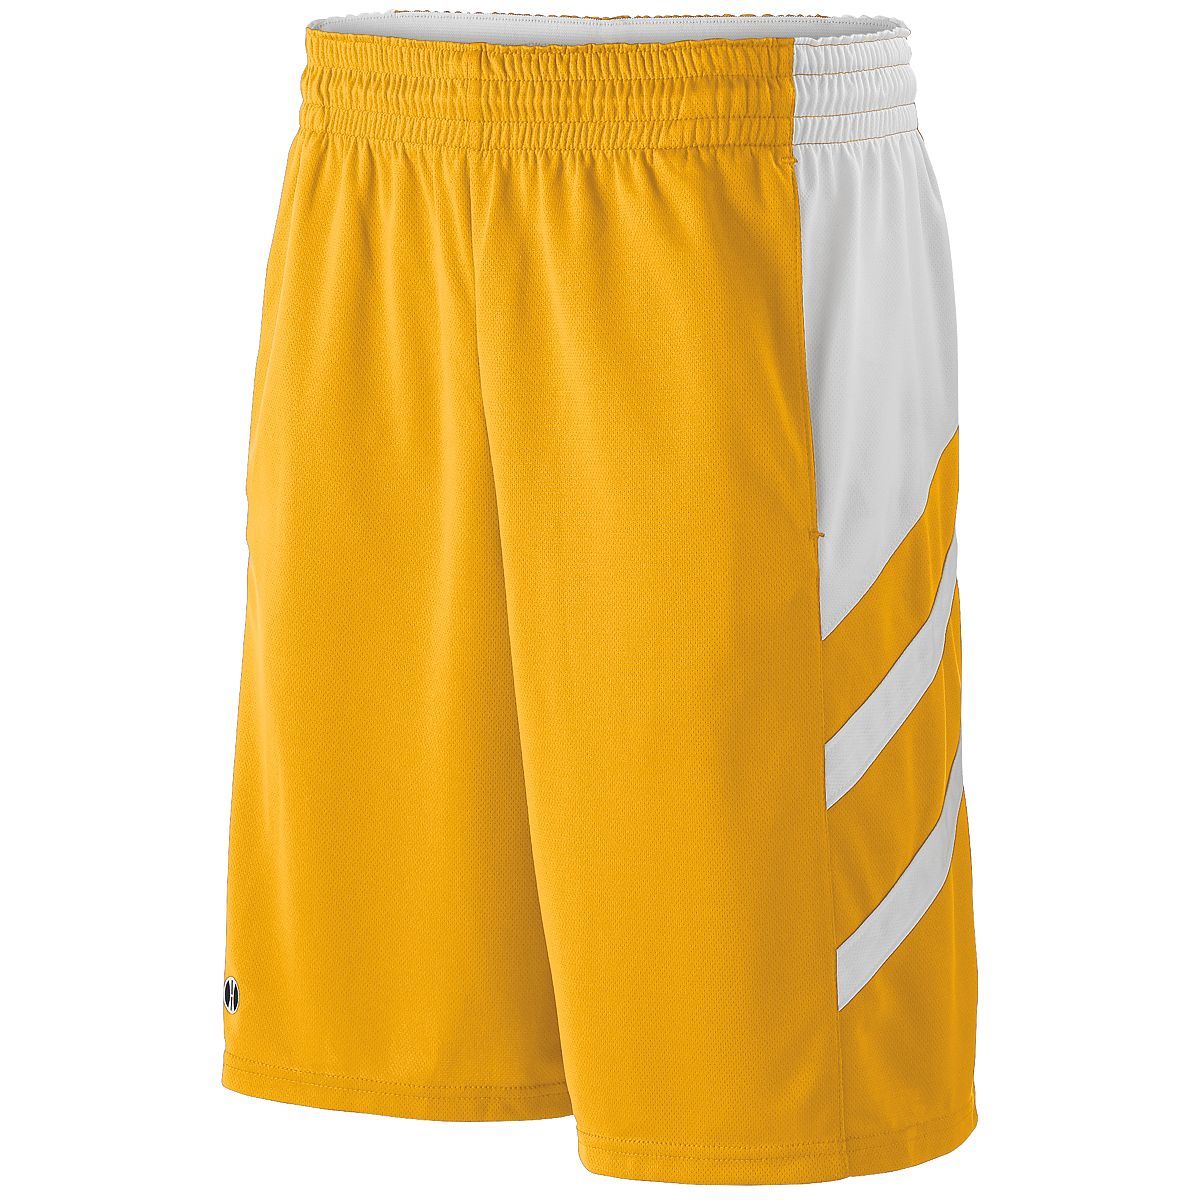 Holloway Helium Shorts in Light Gold/White  -Part of the Adult, Adult-Shorts, Holloway product lines at KanaleyCreations.com